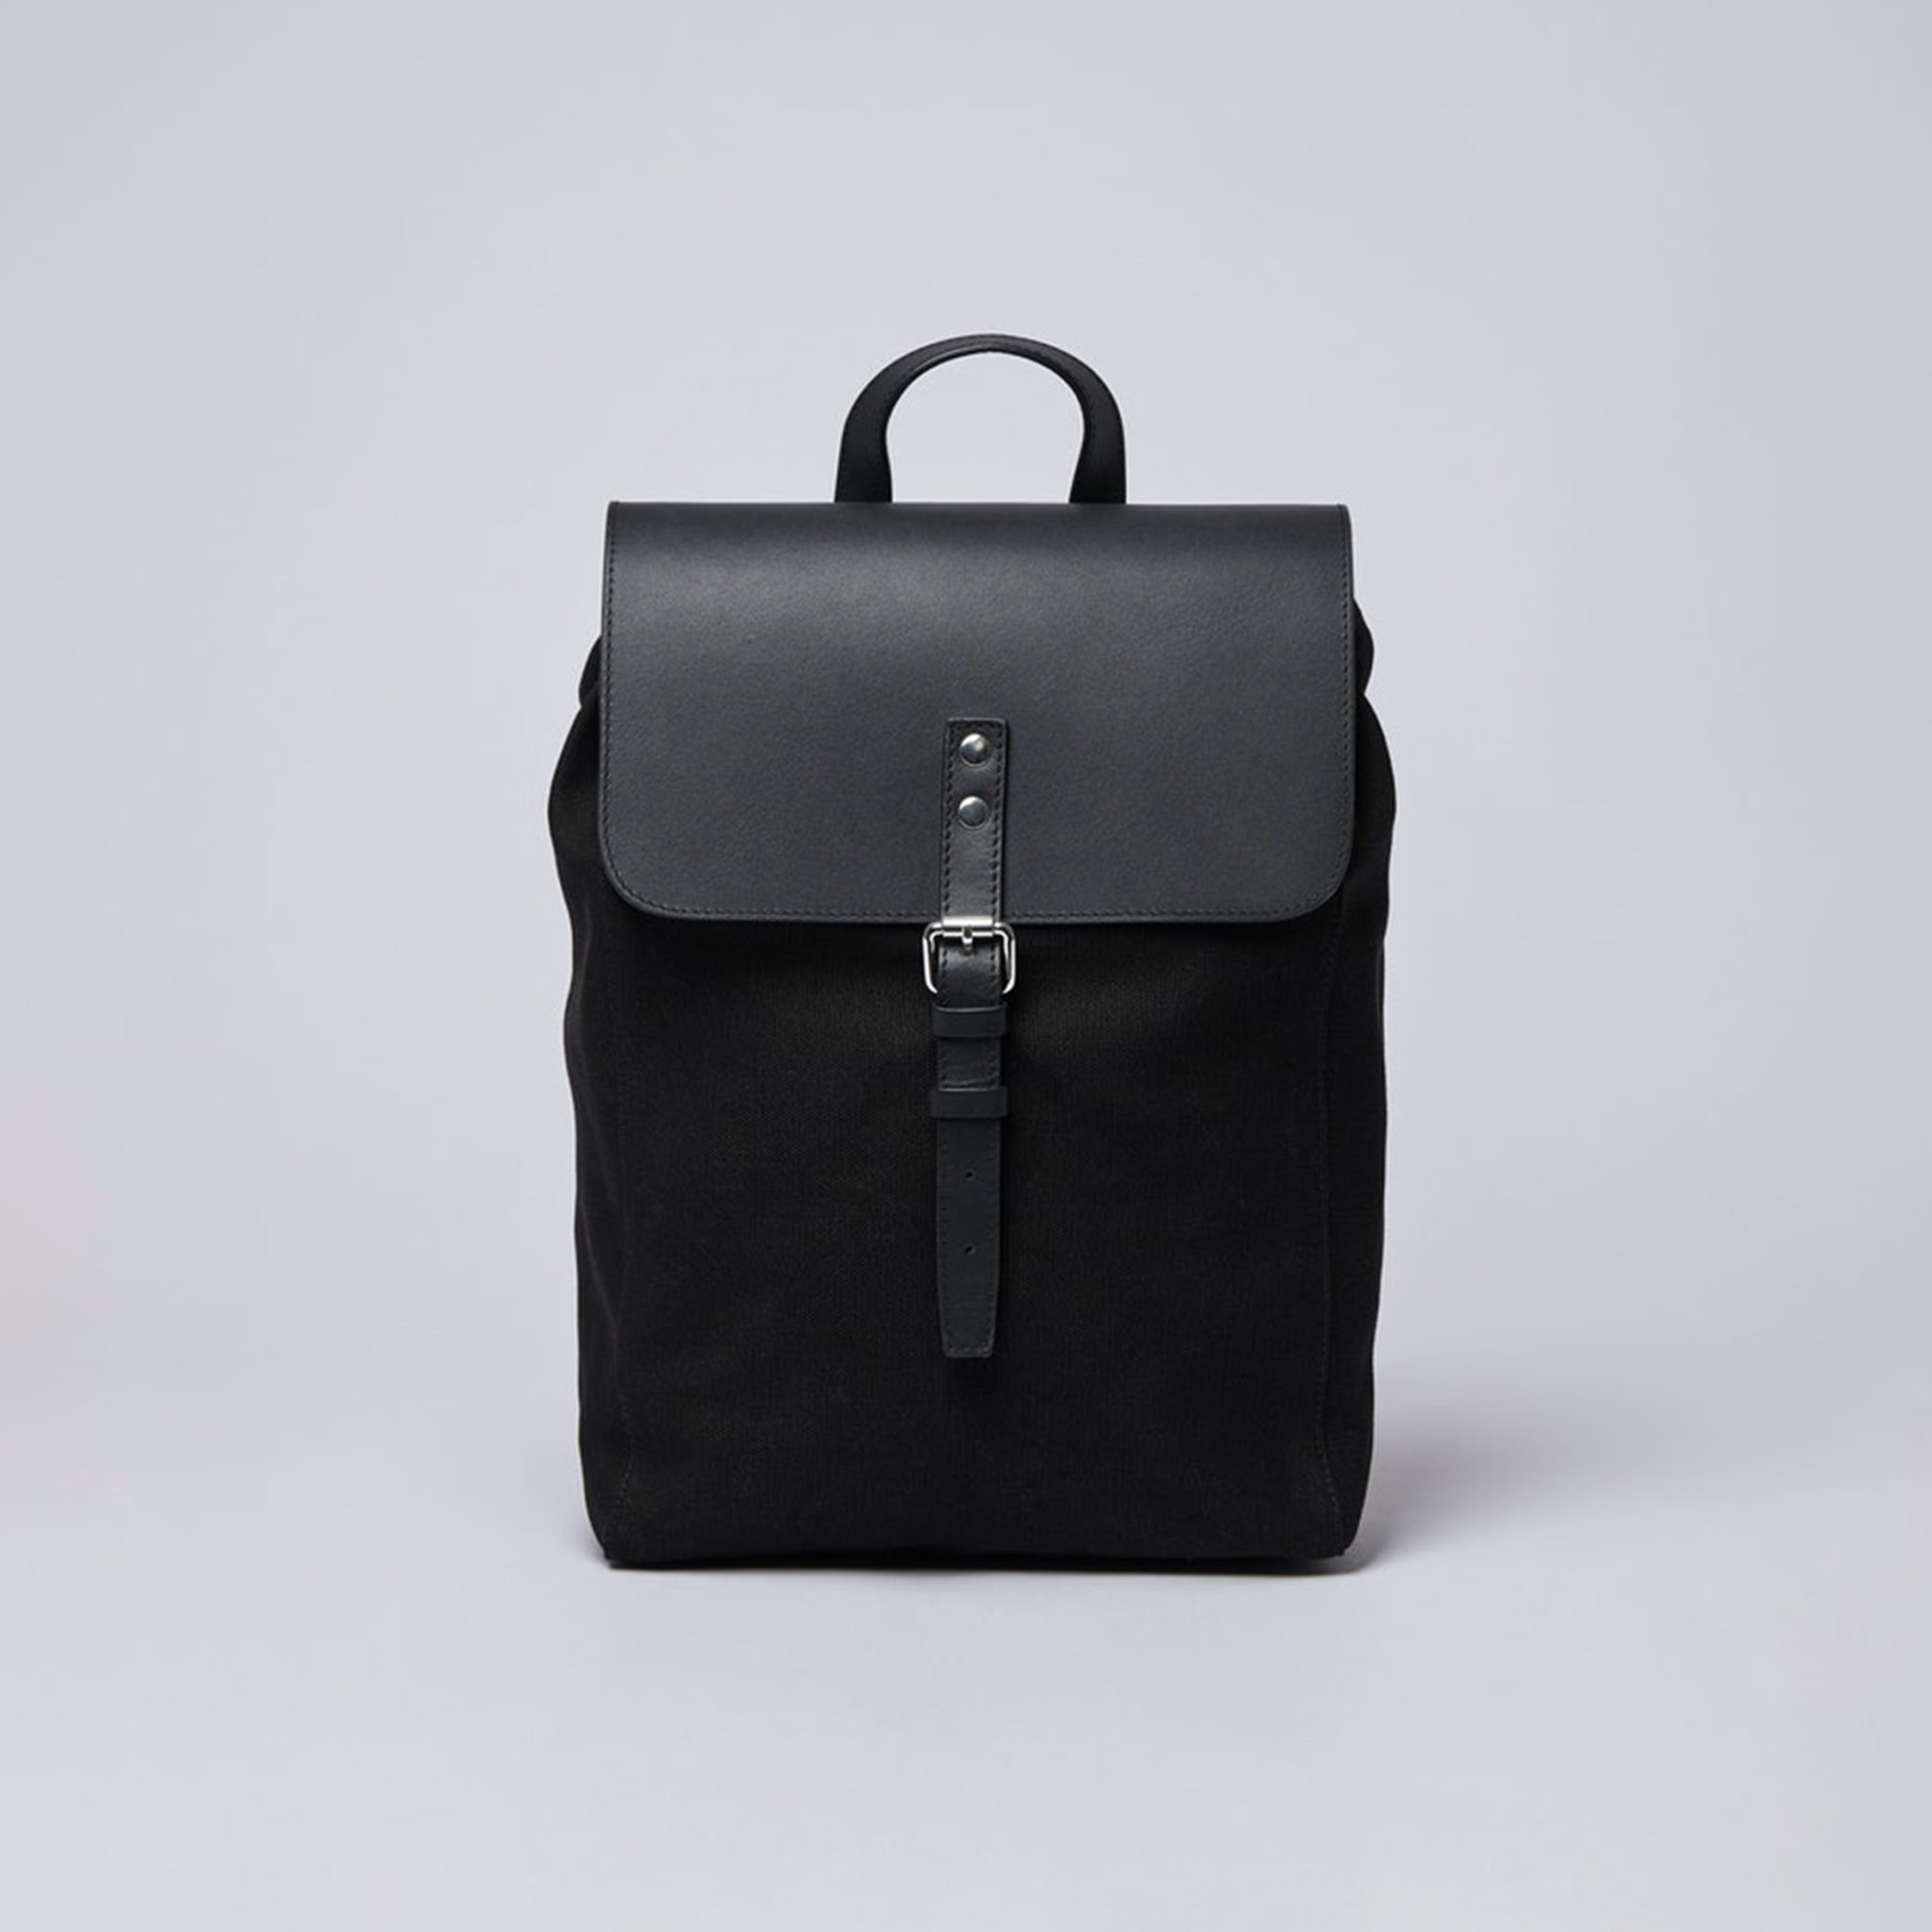 Products | Butler Leather